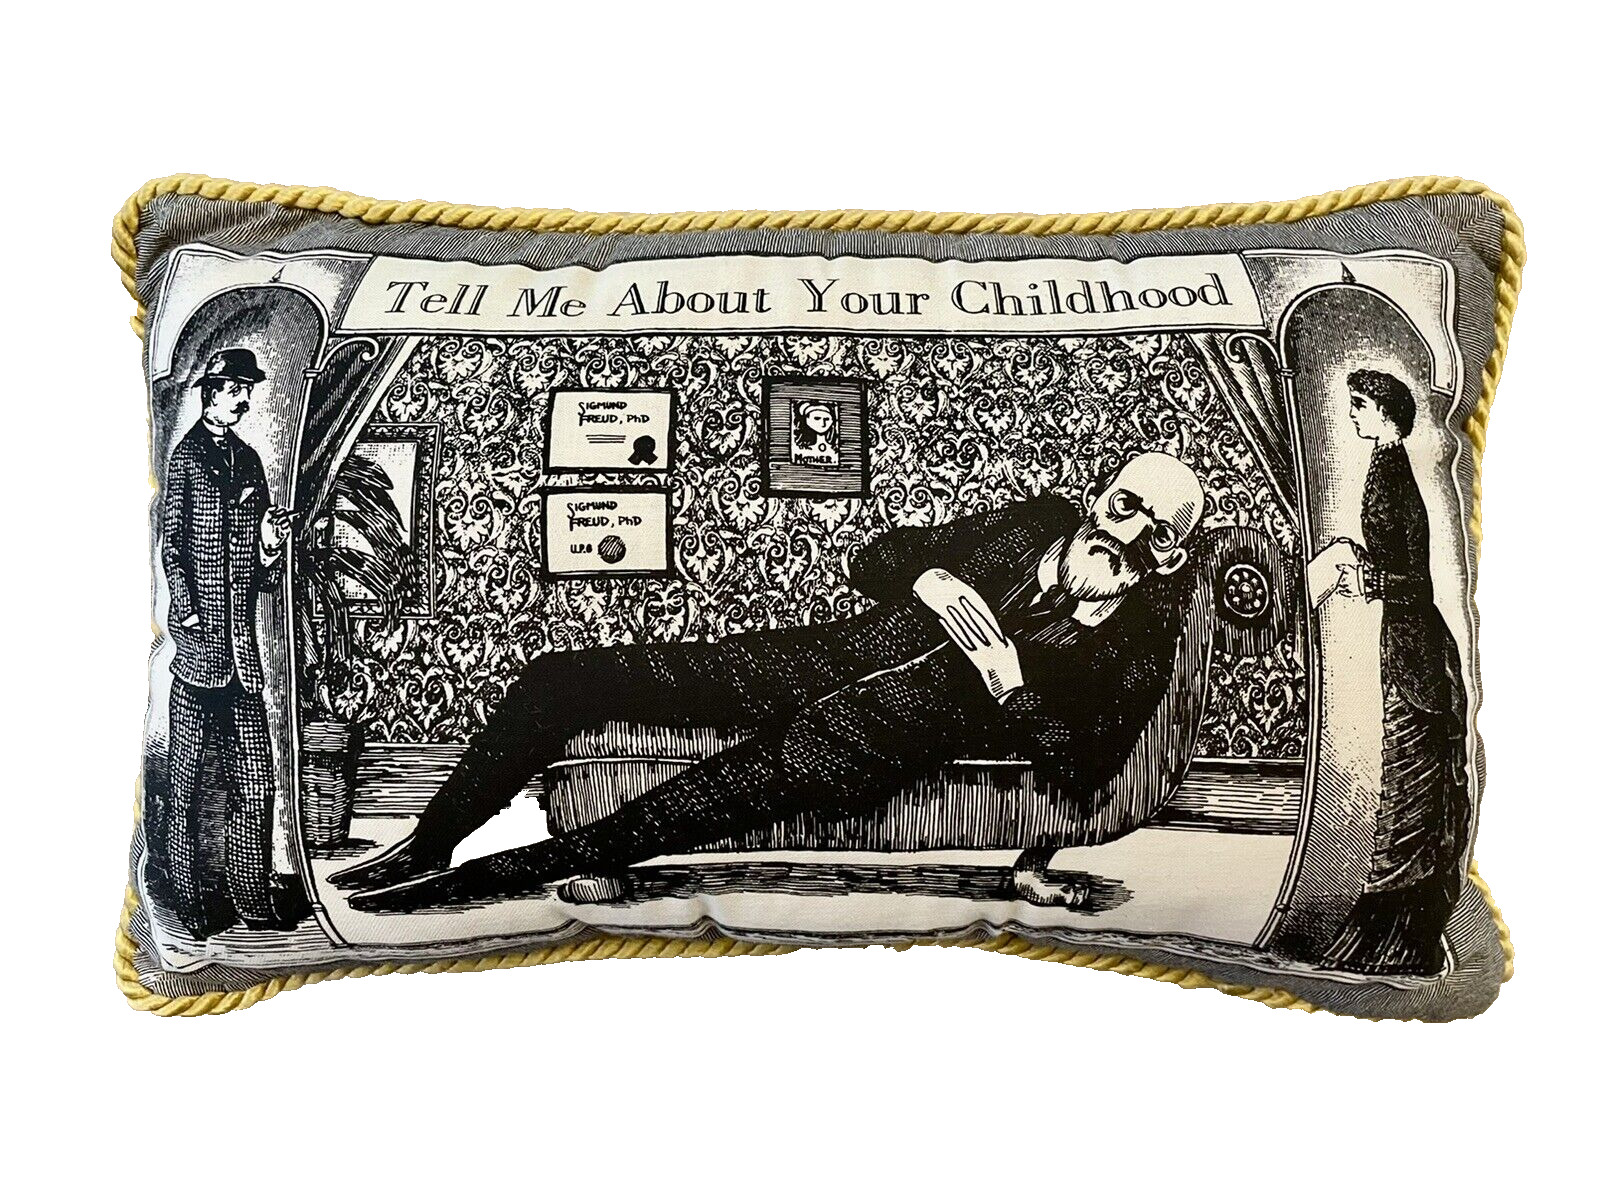 SIGMUND FREUD MUSICAL WIND UP PILLOW PLAYS MEMORIES (THE WAY WE WERE) 9” X 15”